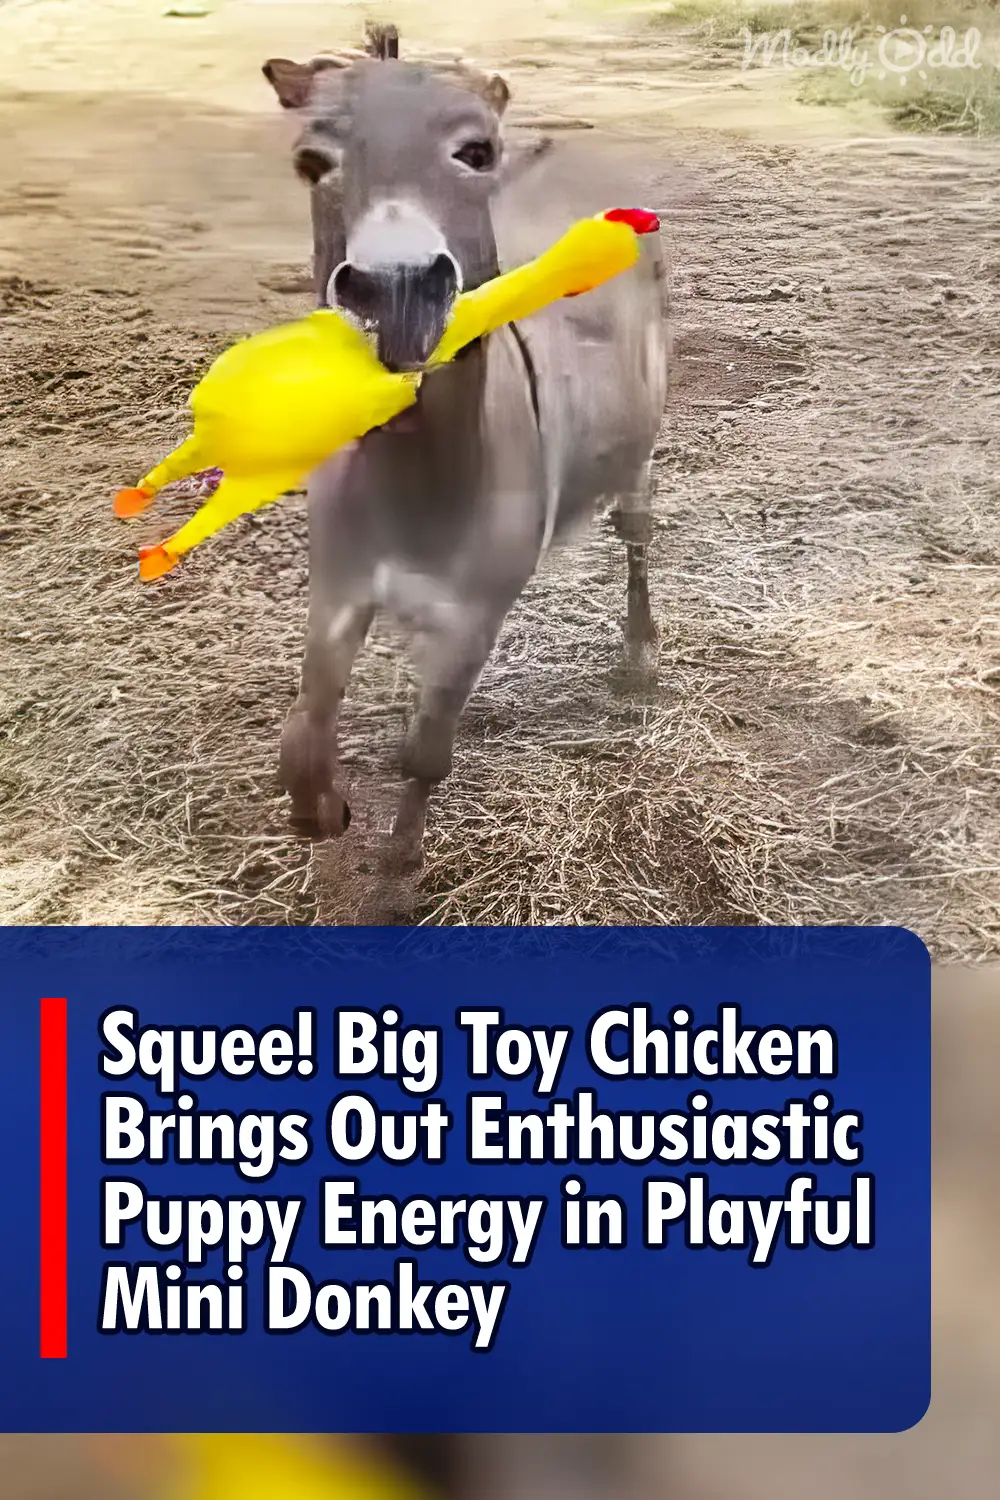 Squee! Big Toy Chicken Brings Out Enthusiastic Puppy Energy in Playful Mini Donkey